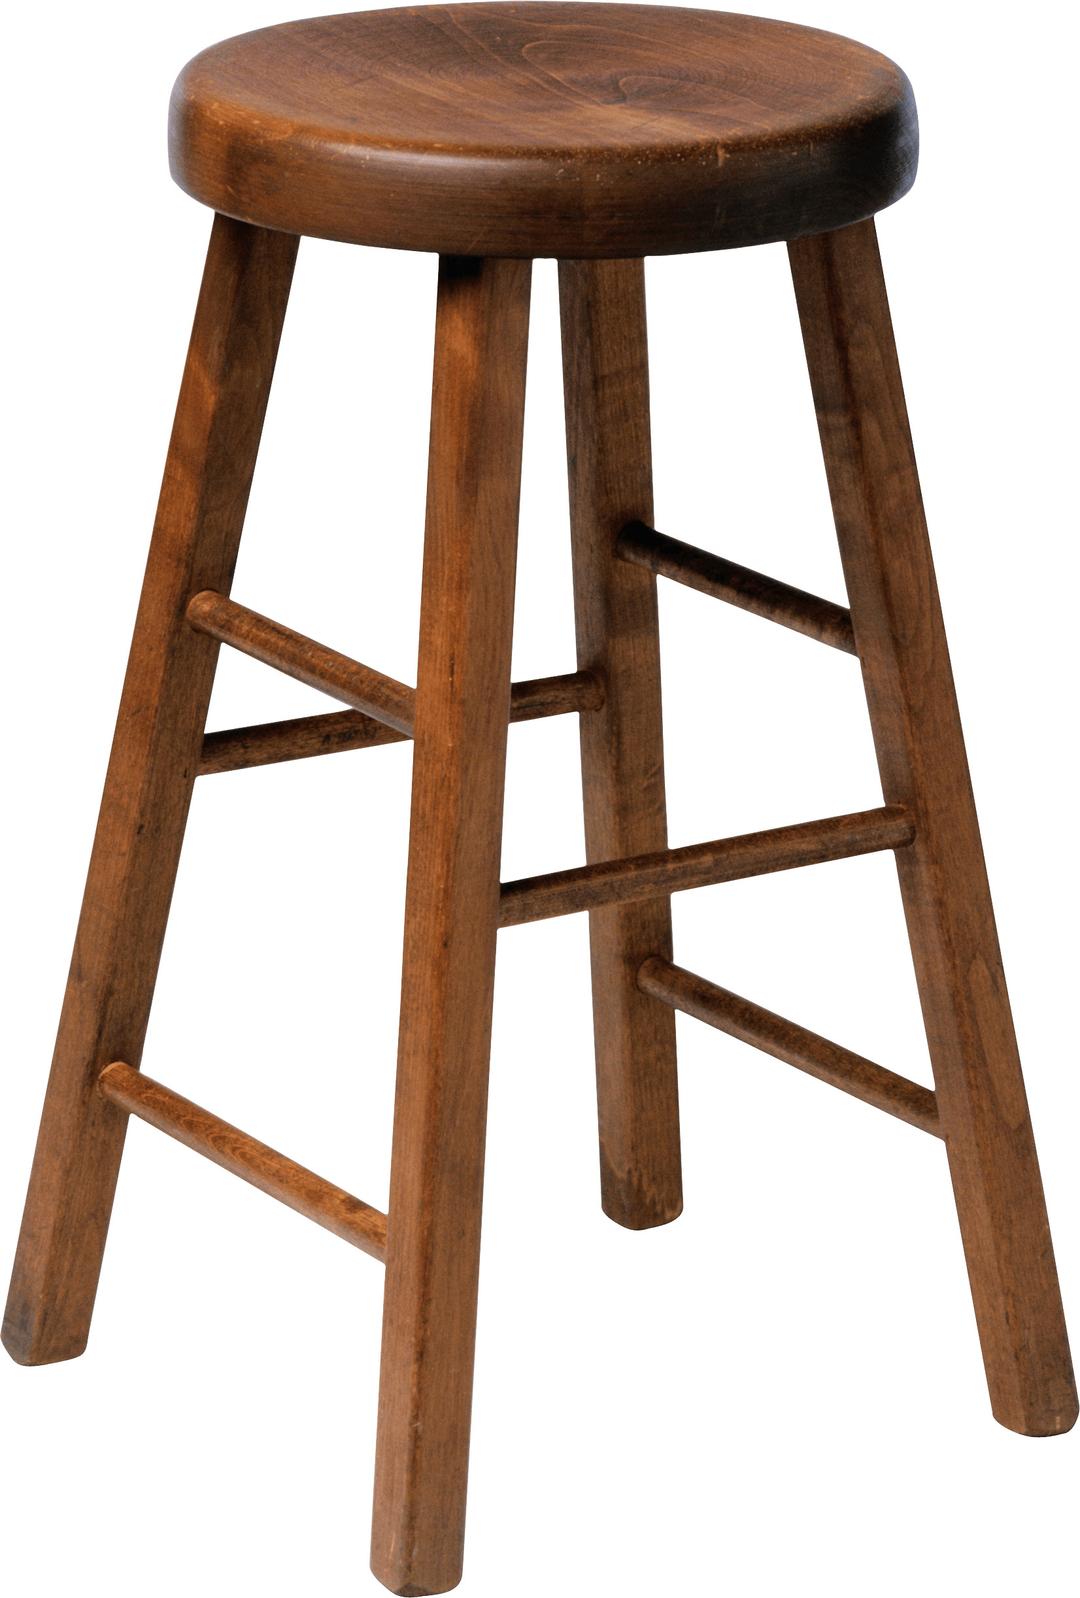 Wooden Stool Chair png transparent